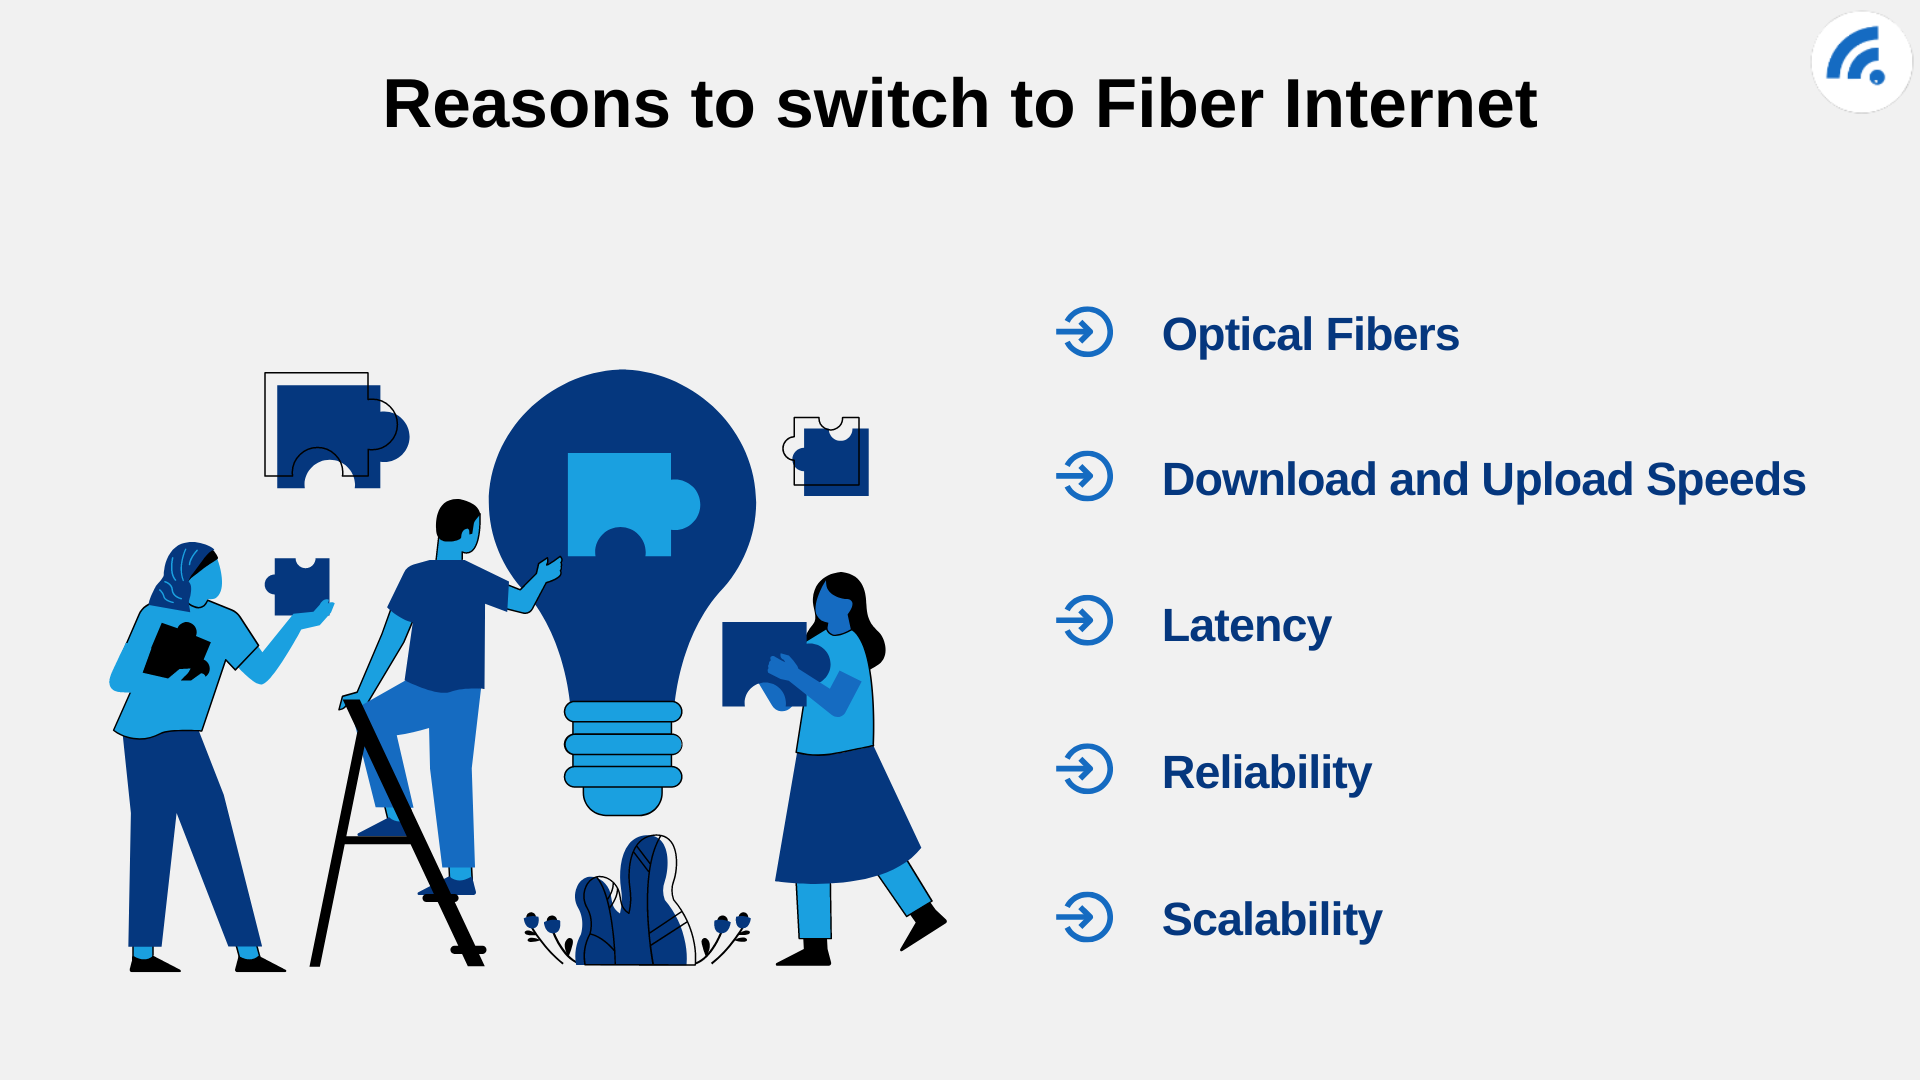 Reasons to switch to fiber internet